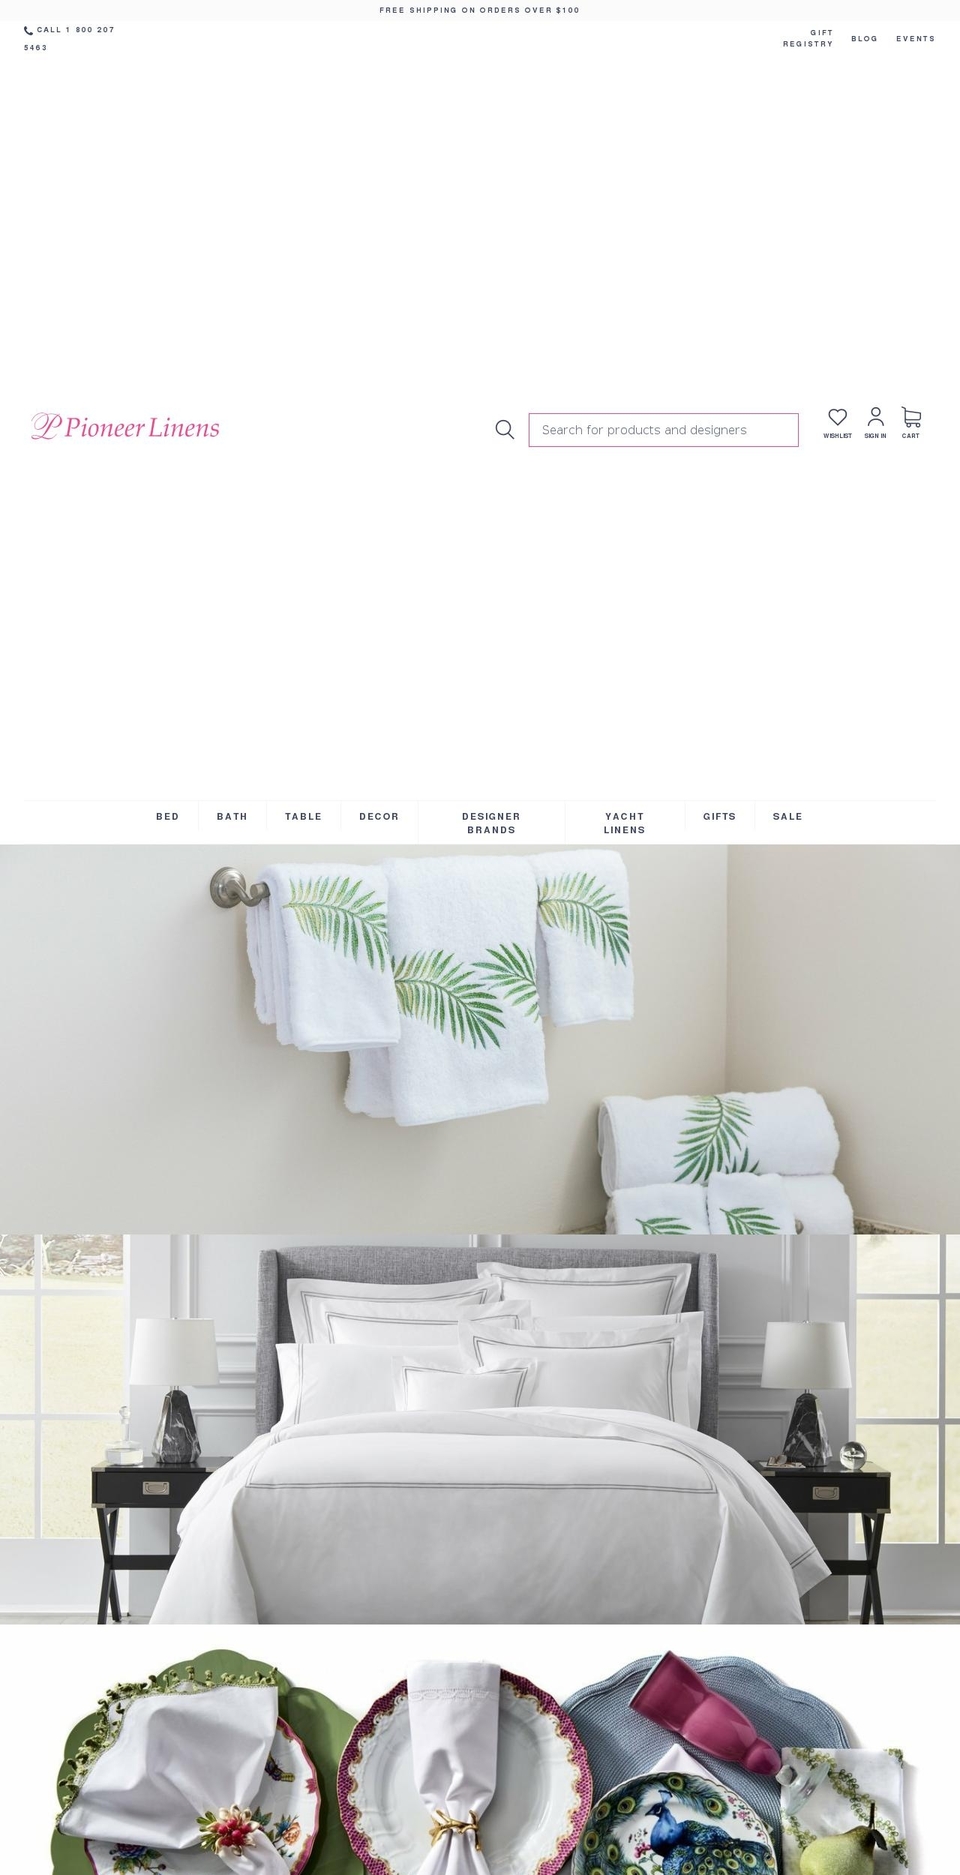 Buko Shopify Theme - Products Consolidation Shopify theme site example loomlinens.com